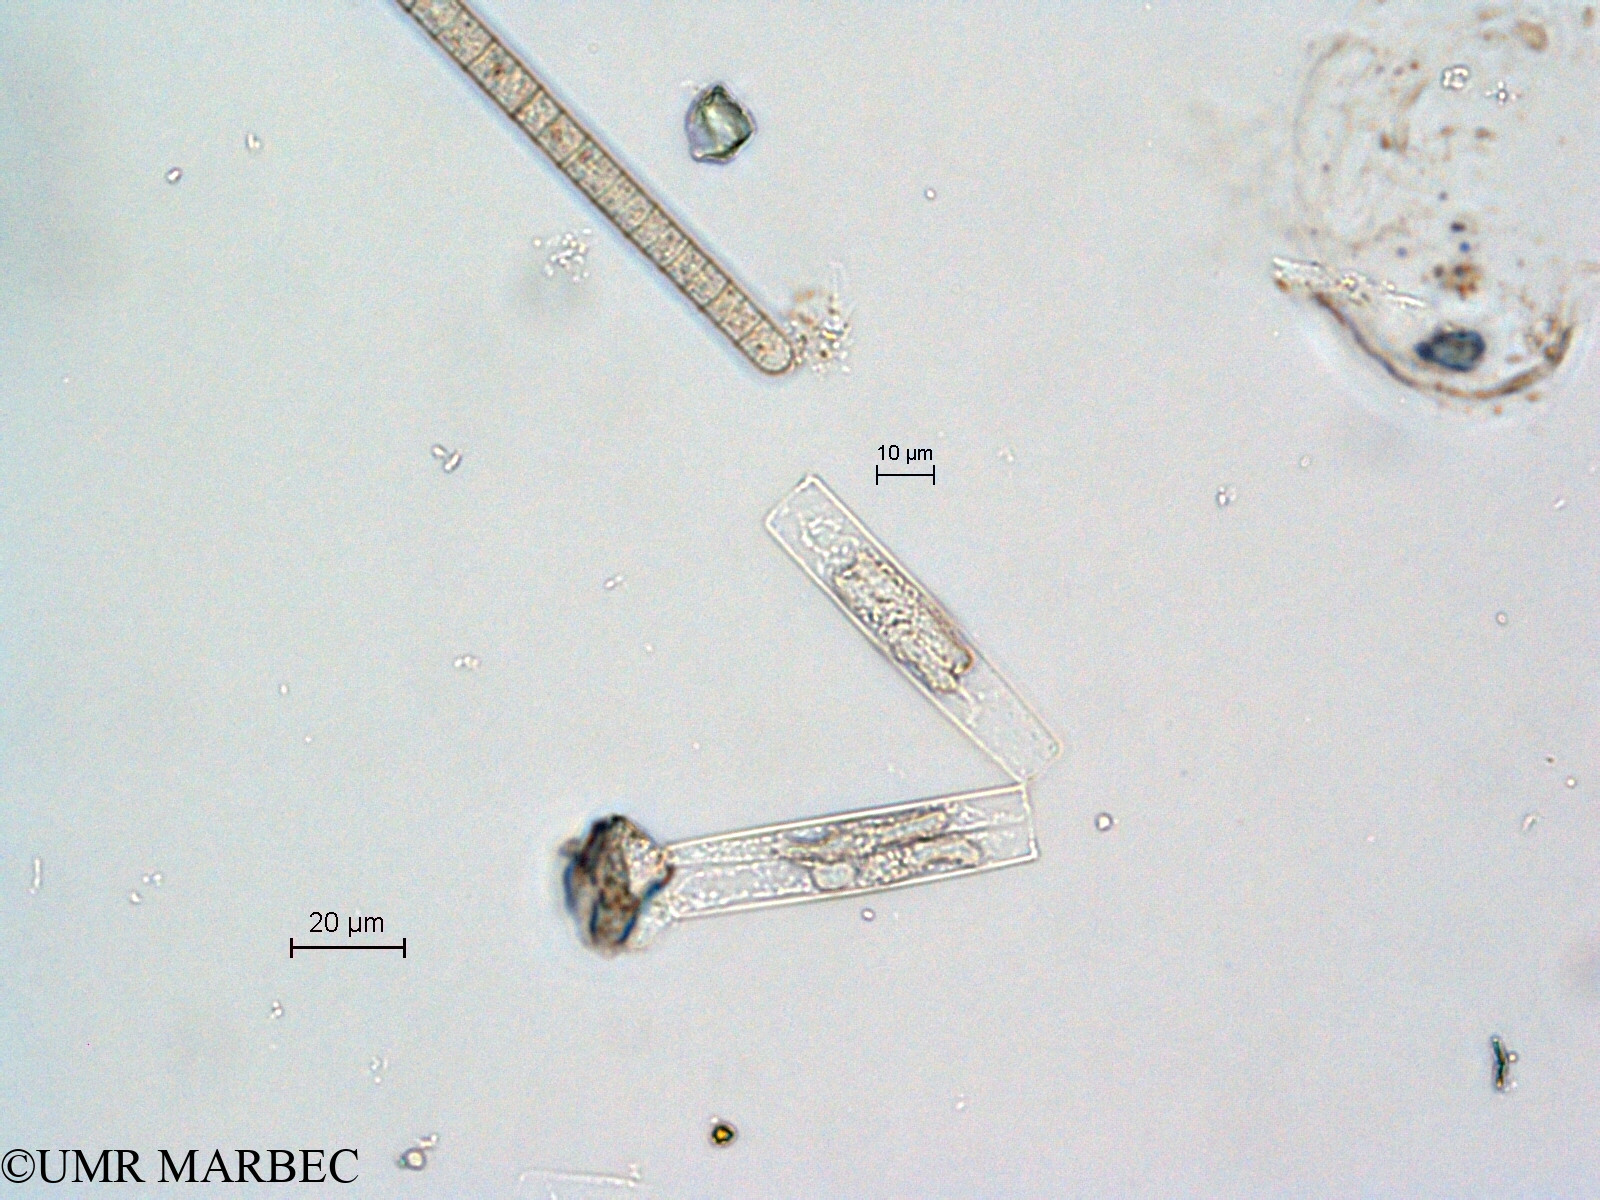 phyto/Scattered_Islands/all/COMMA April 2011/Thalassionema sp2 (recomposé)(copy).jpg